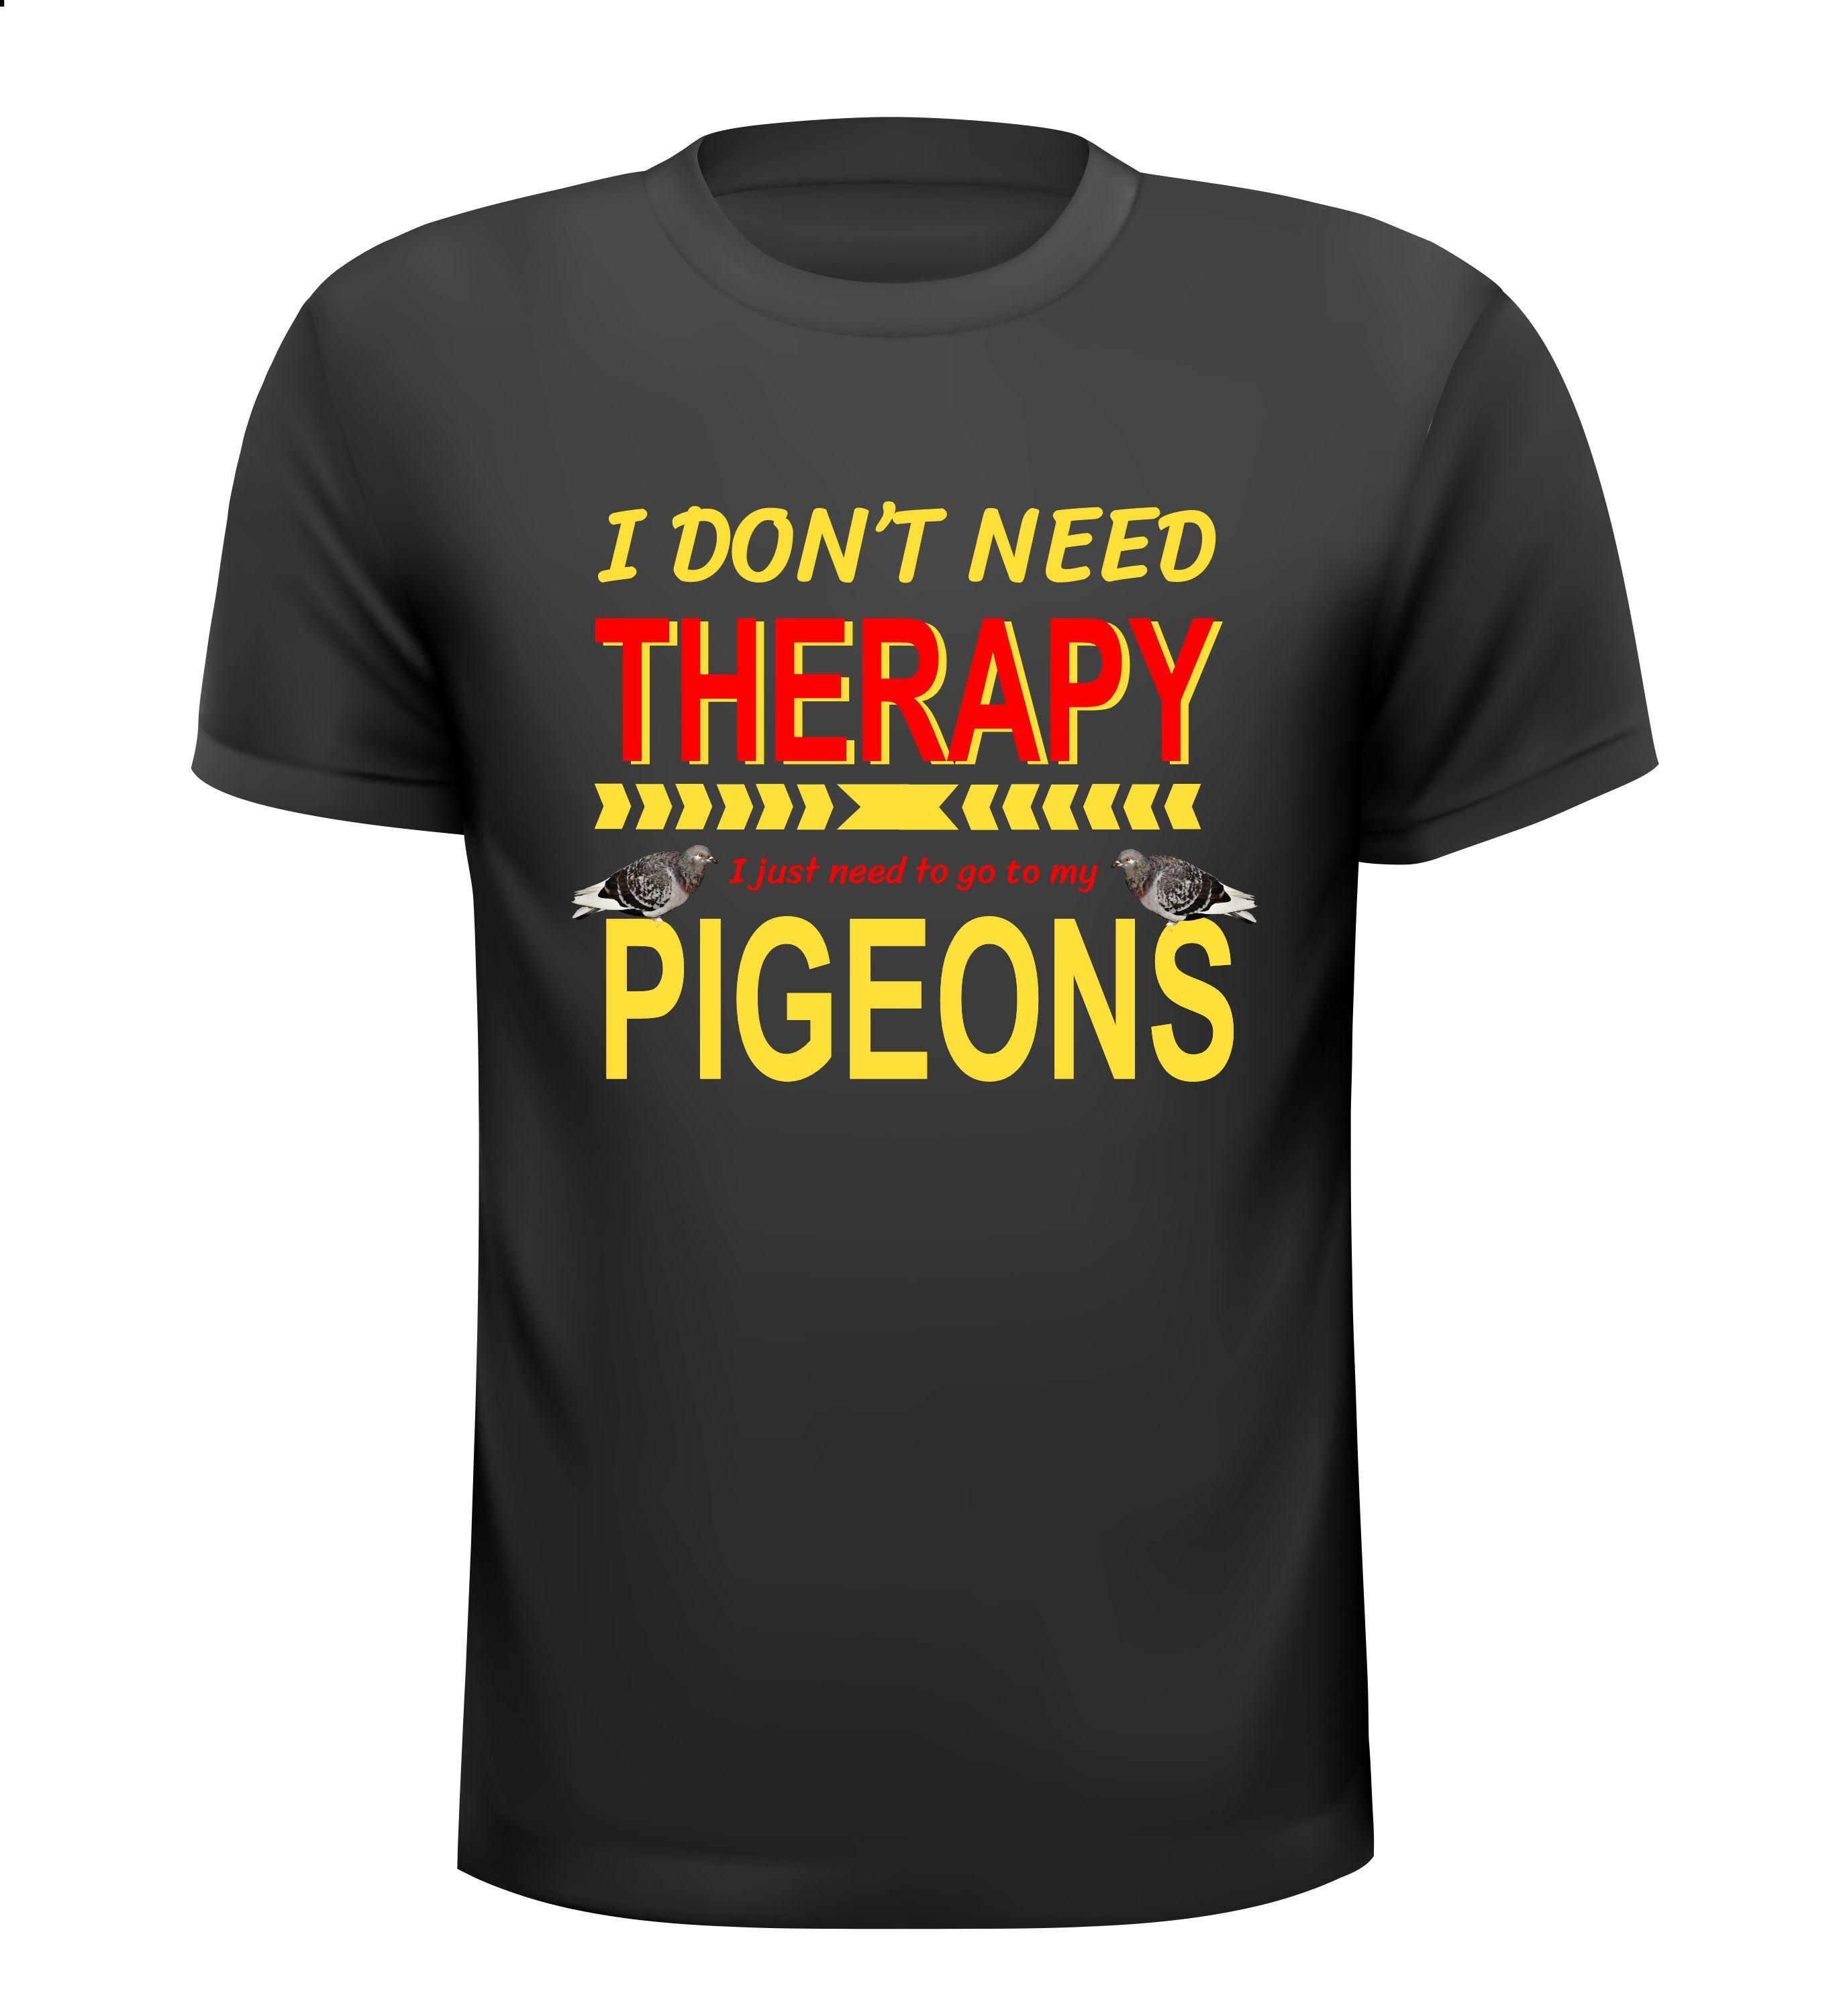 Duiven T-shirt voor duivenliefhebbers I don't need therapy, I just need to go to my pigeons